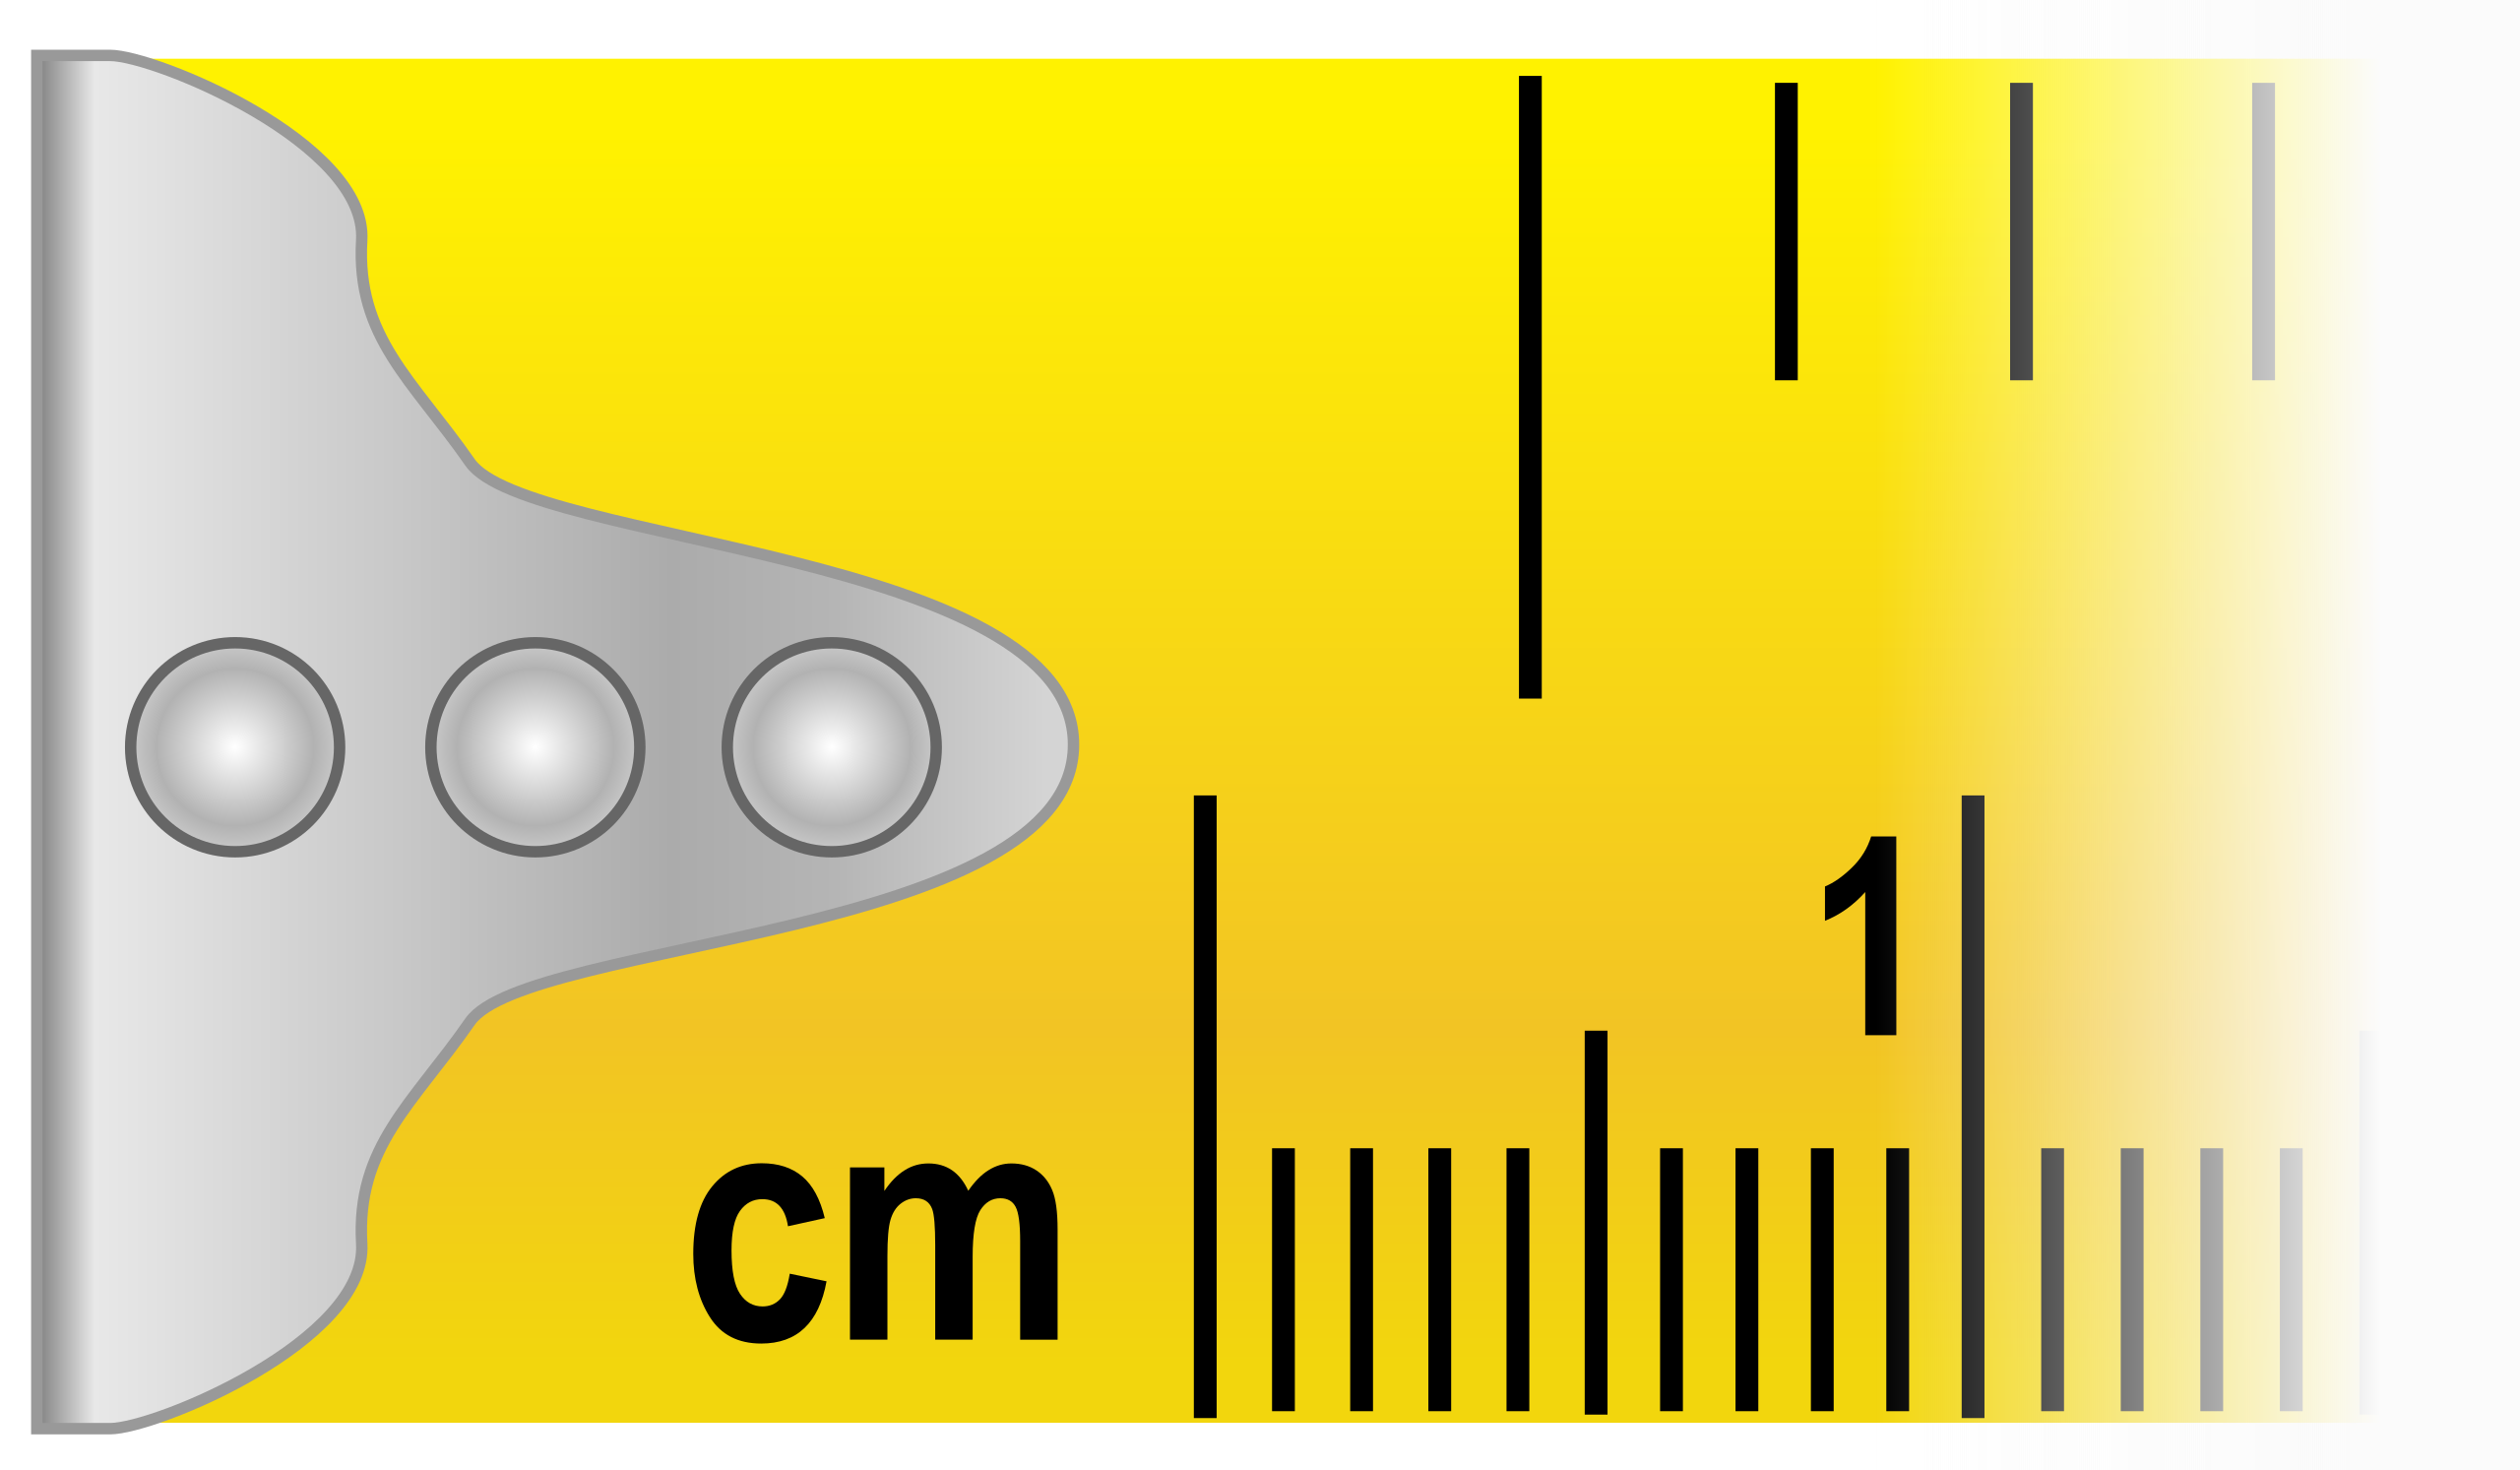 https://upload.wikimedia.org/wikipedia/commons/thumb/1/19/Measuring_tape_icon.svg/2560px-Measuring_tape_icon.svg.png